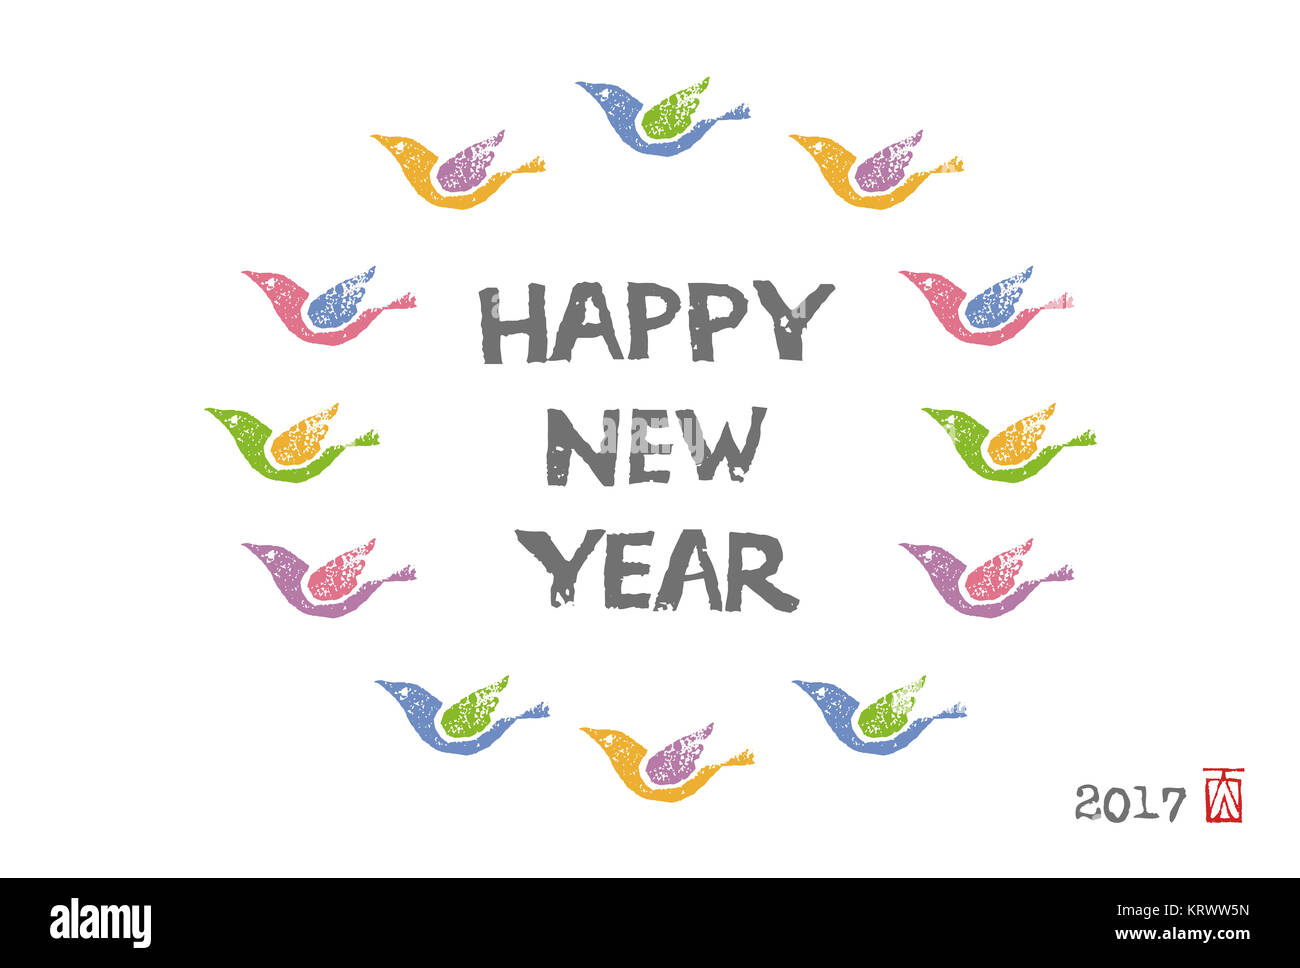 New Year Card with colorful birds Stock Photo